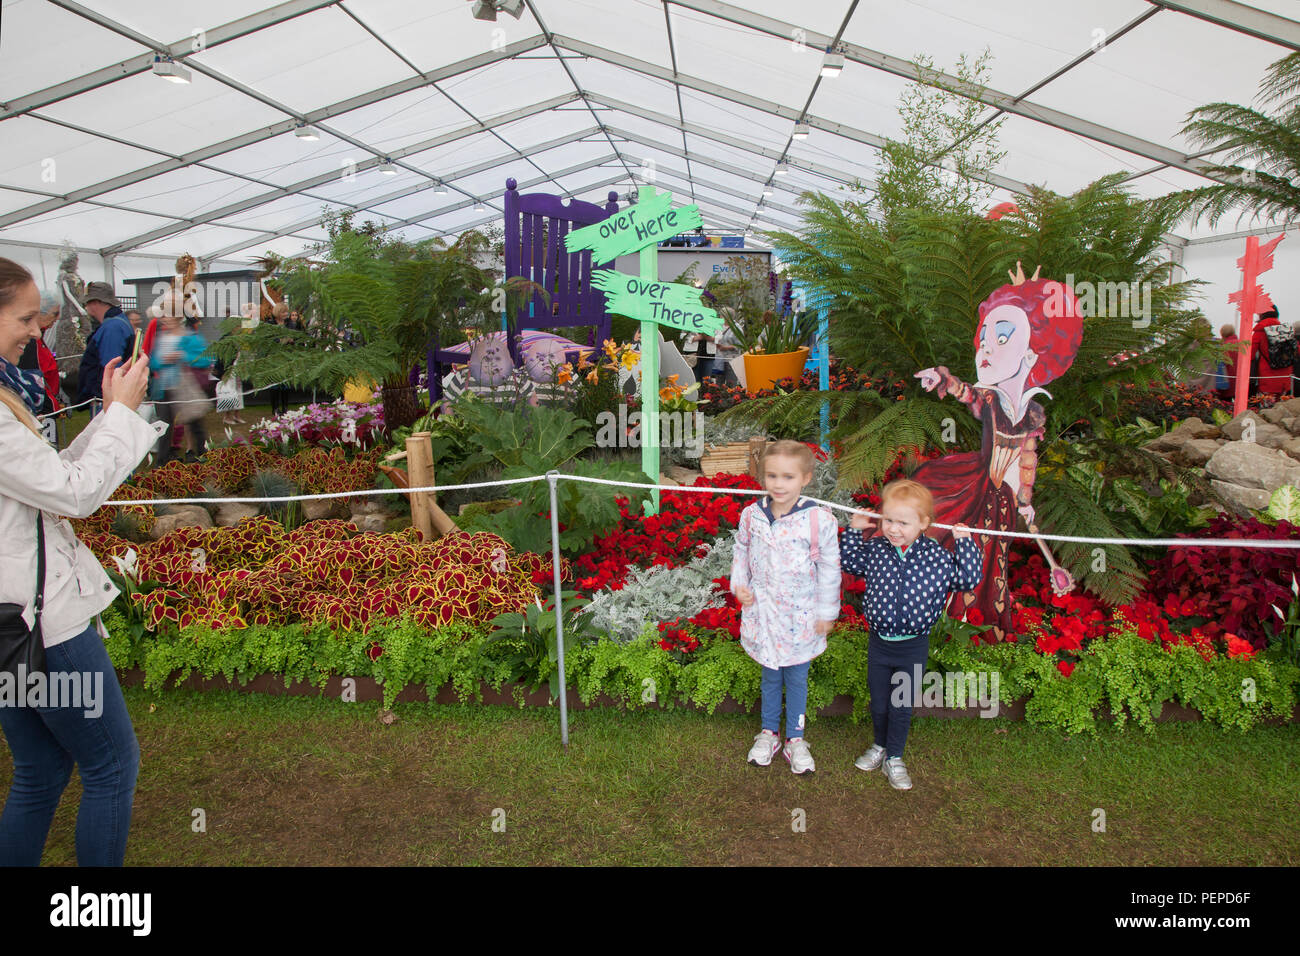 Children at Southport, Merseyside, UK. 17th Aug, 2018. The Queen of hearts points to visitors at Southport Flower Show as entertainers, exhibitors, garden designers, and floral artists wow the visitors to this famous annual event. Credit; MediaWorldImages/AlamyLiveNews Stock Photo